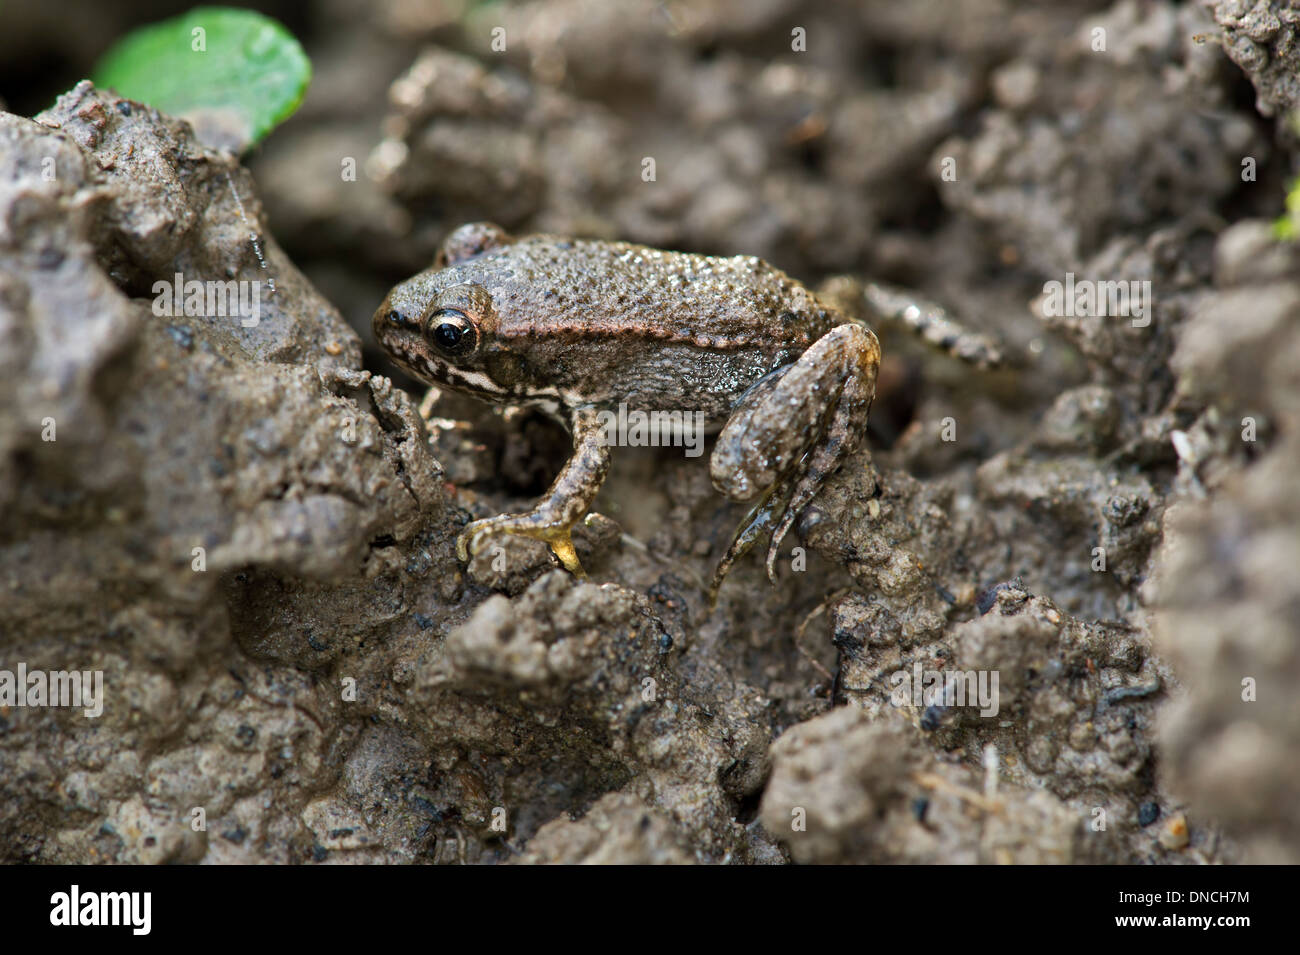 Juvenile Midwife toad (Alytes obstetricans) Stock Photo